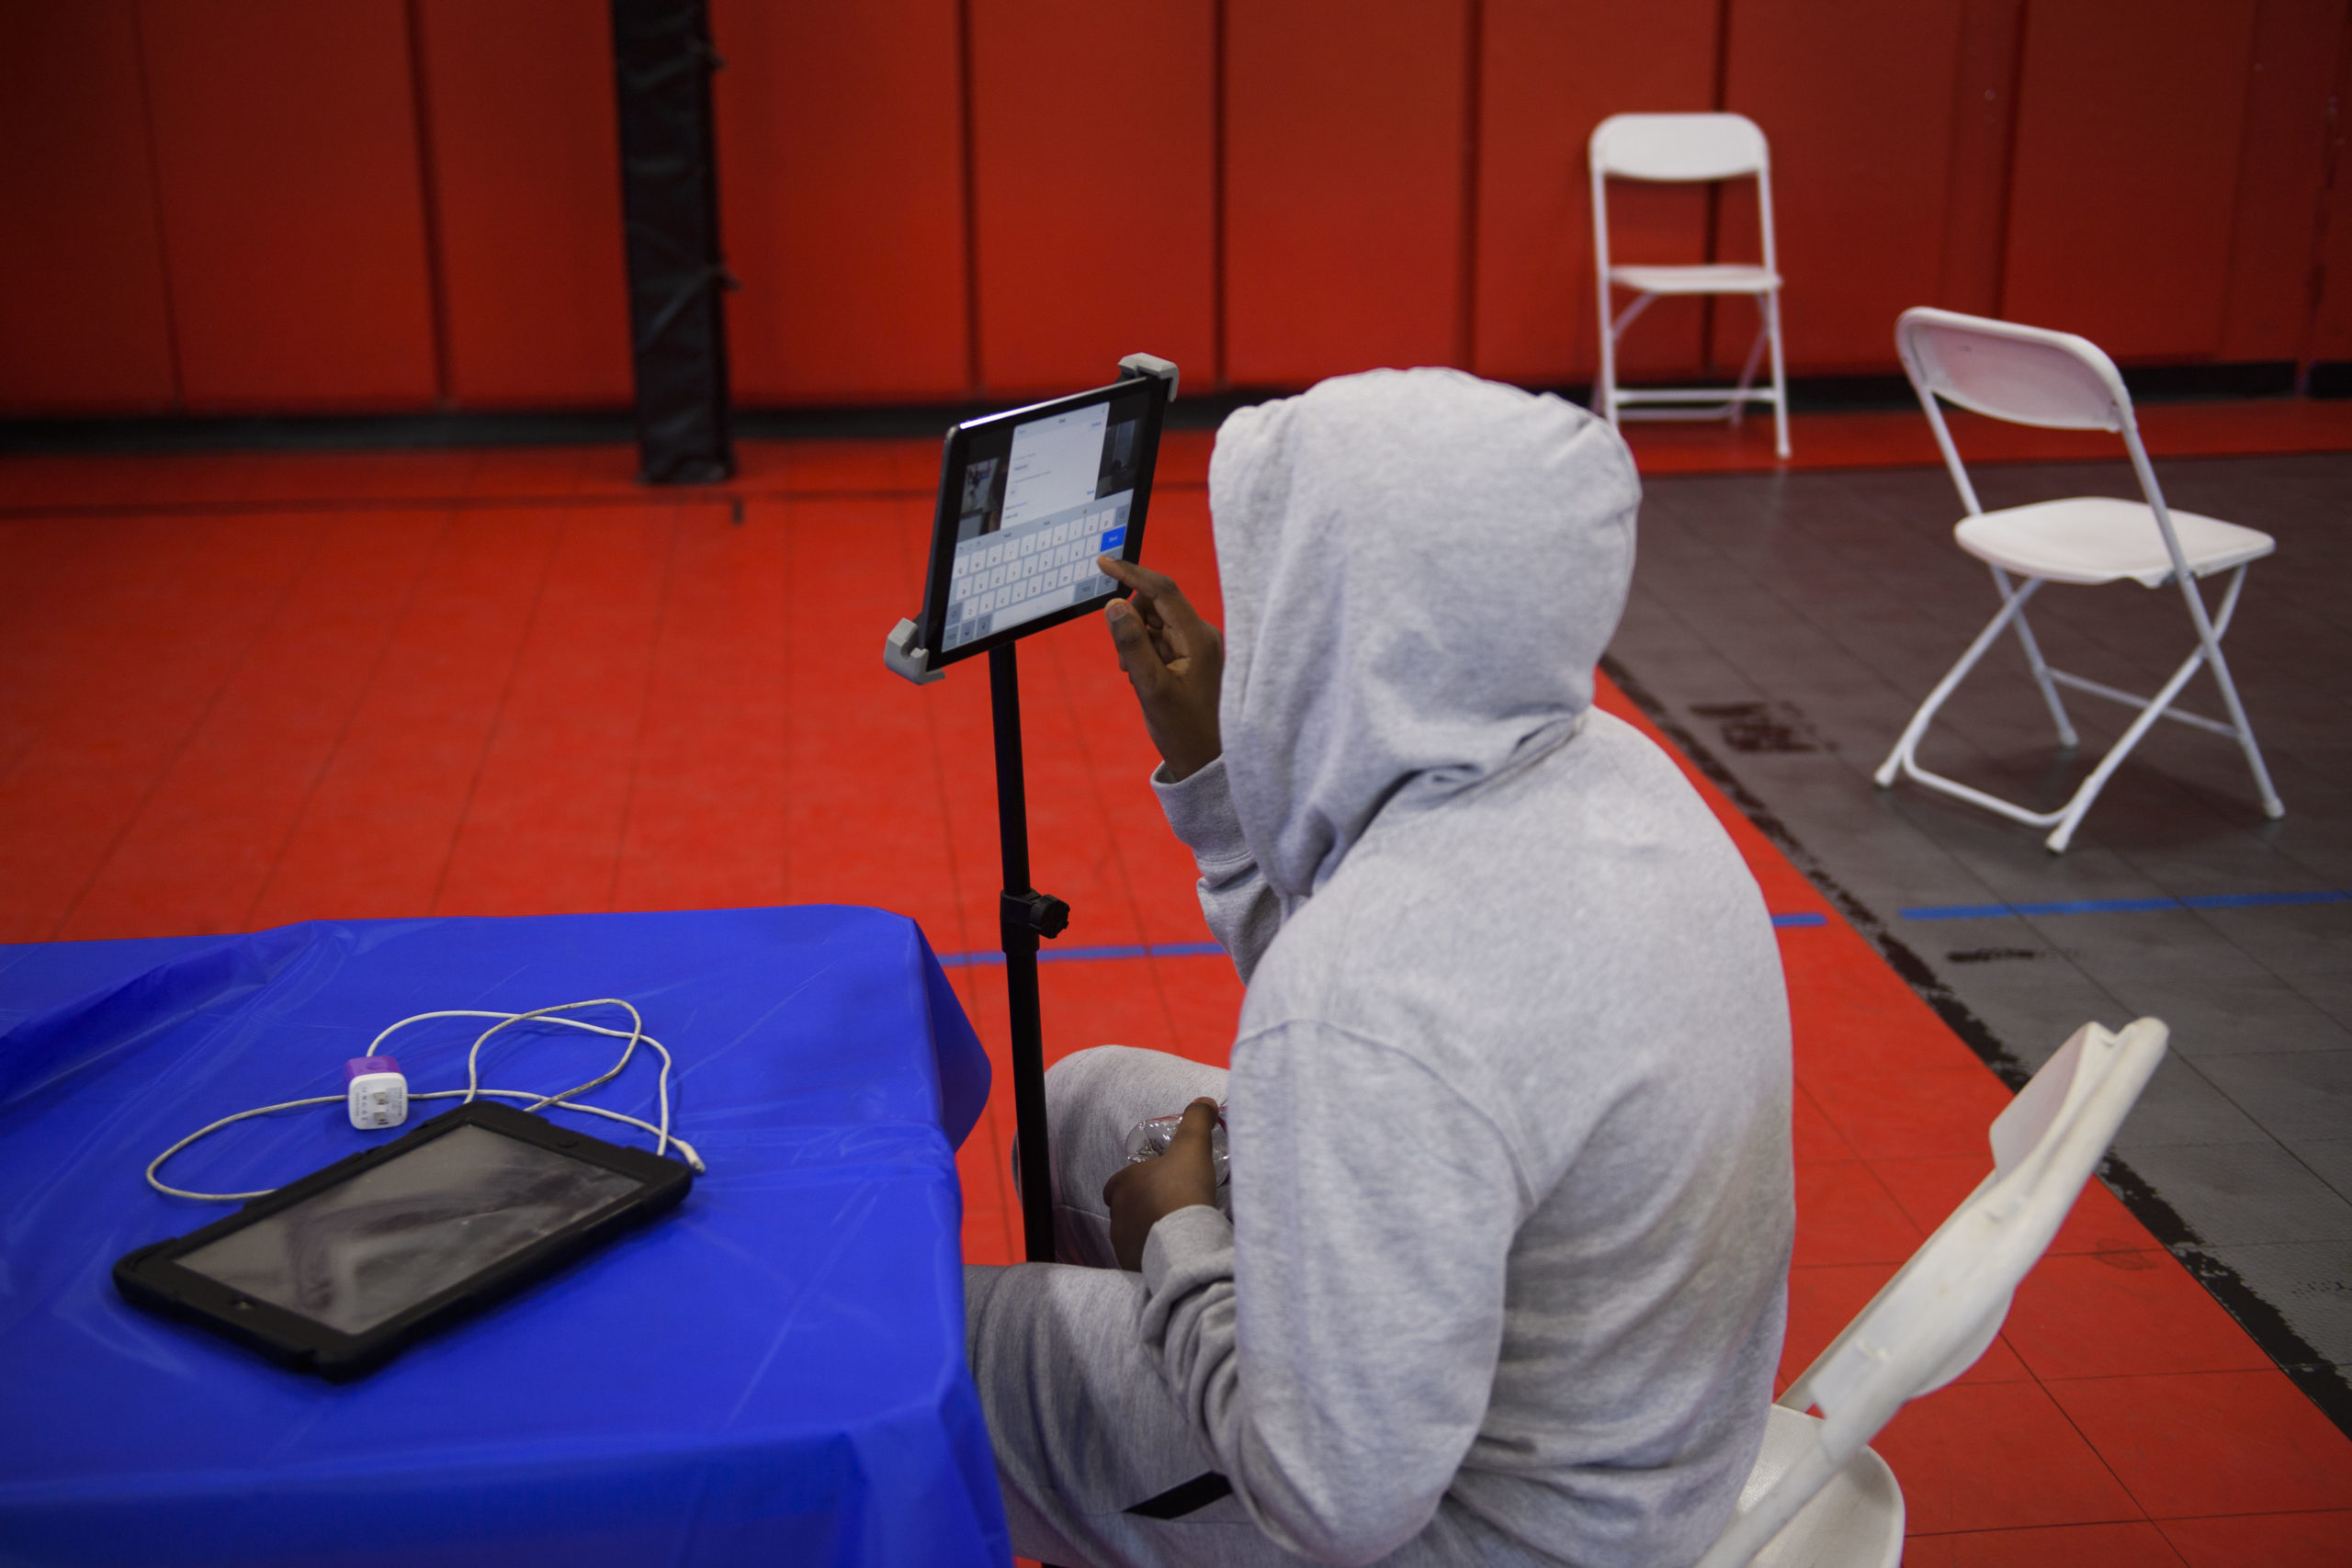 A child attends an online class at a YMCA on Feb. 17 in Los Angeles. (Patrick T. Fallon/AFP via Getty Images)